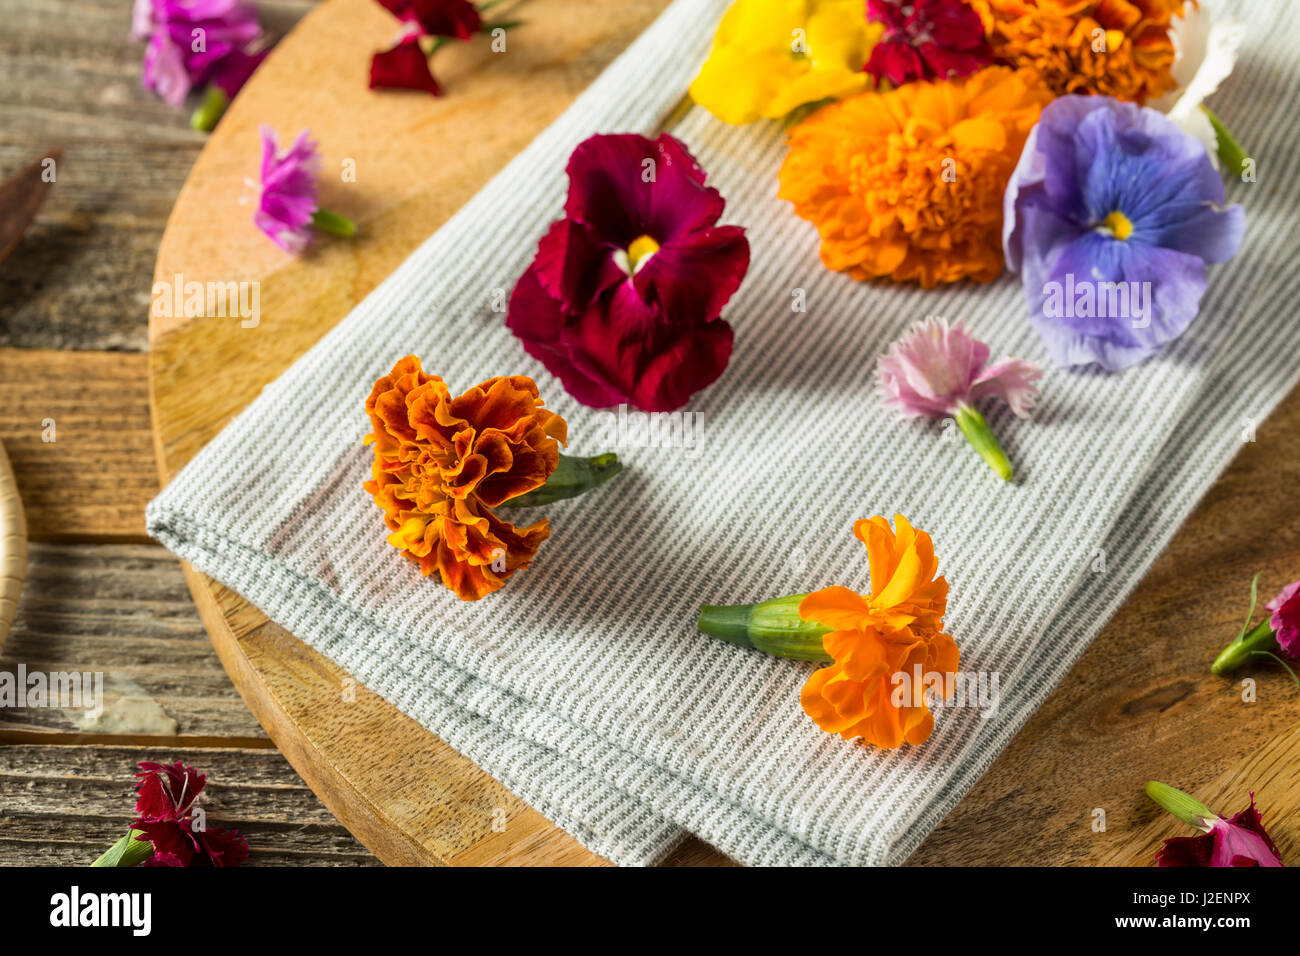 15,276 Salad Edible Flowers Images, Stock Photos, 3D objects